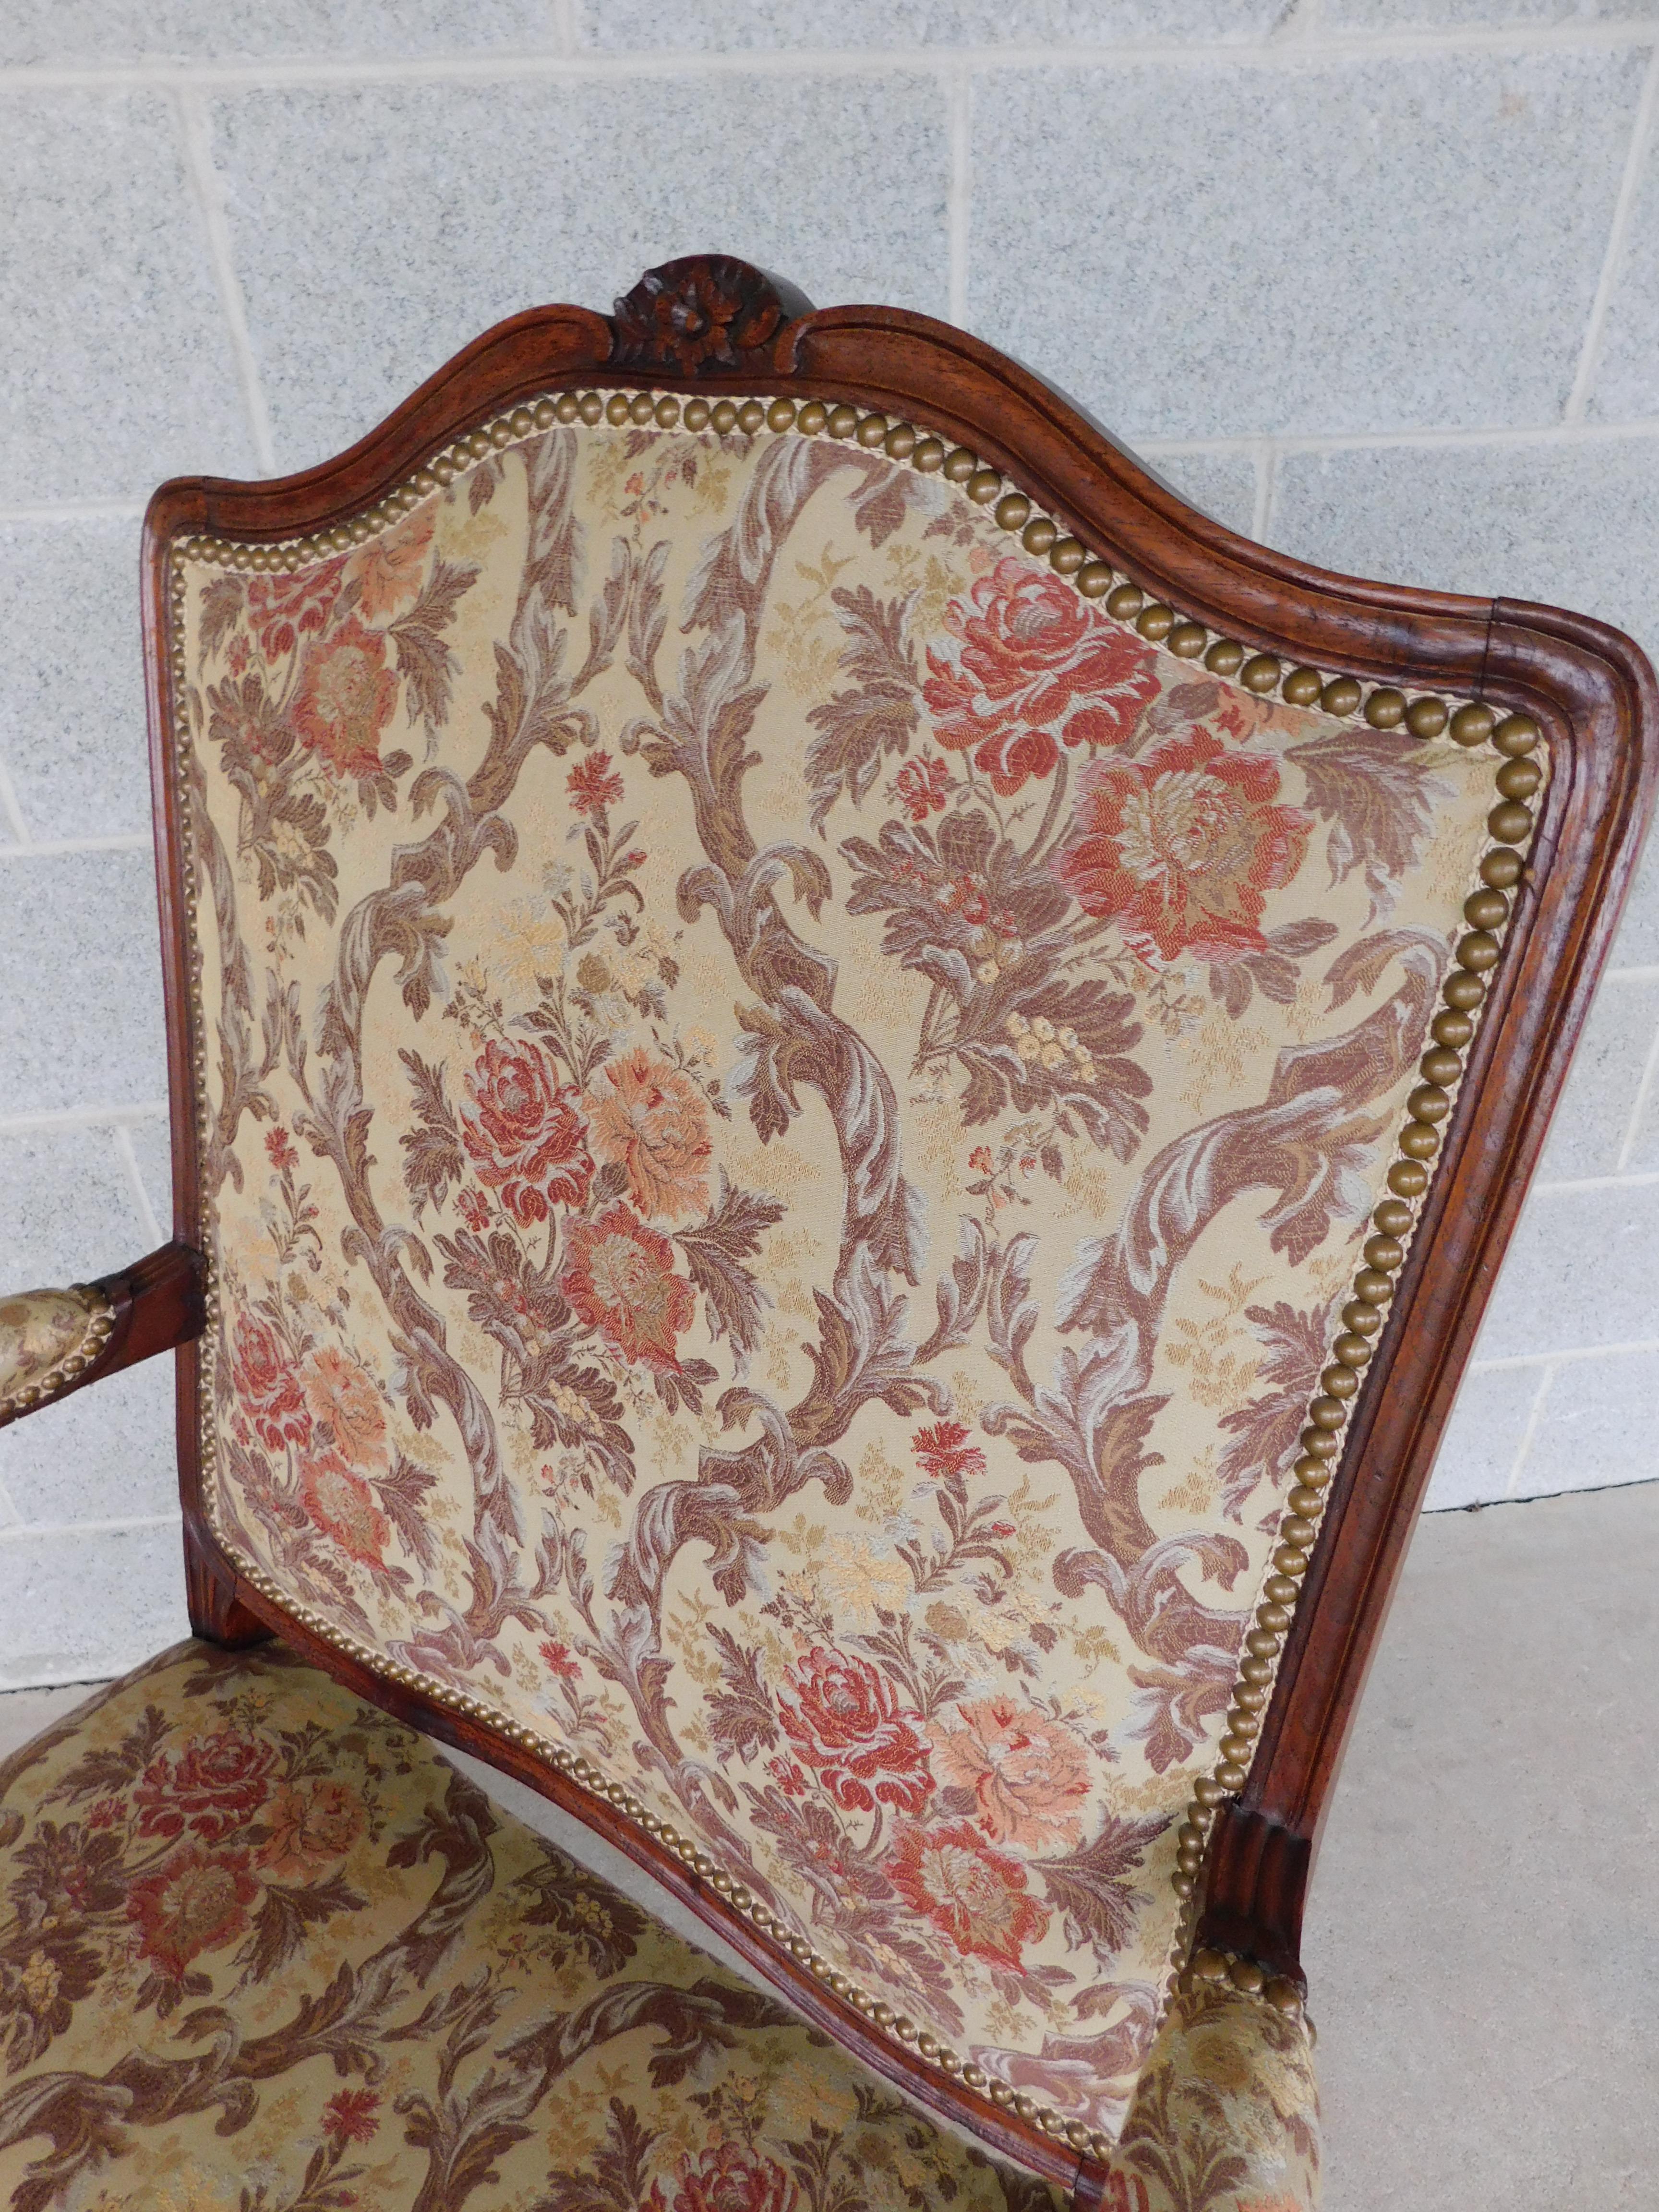 Vintage French Louis XV Style Fauteuil Chairs  - a Pair For Sale 1